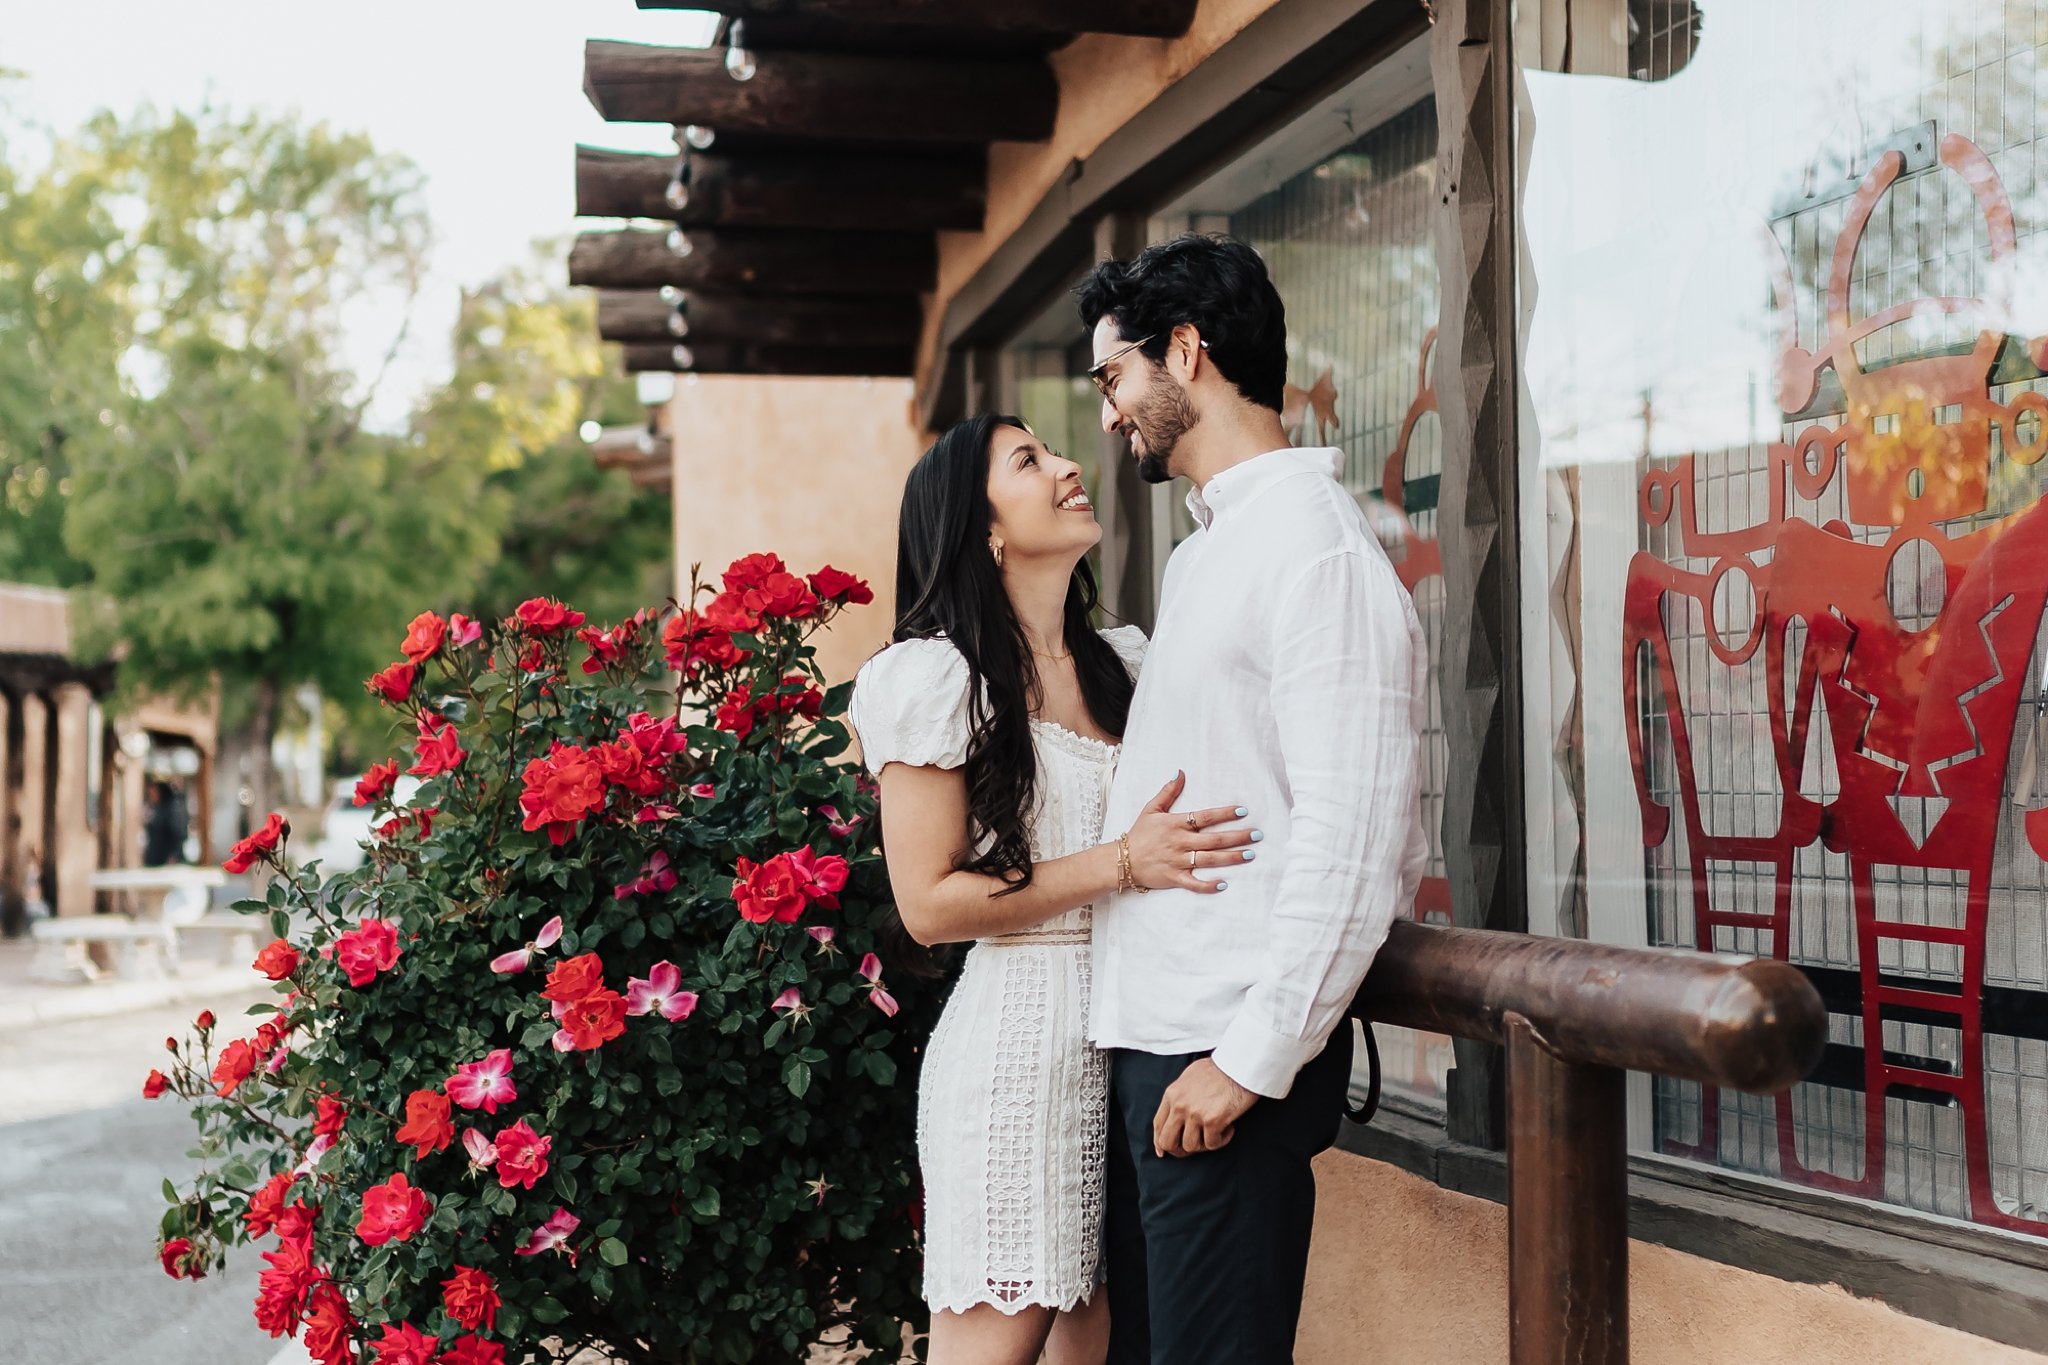 Alicia+lucia+photography+-+albuquerque+wedding+photographer+-+santa+fe+wedding+photography+-+new+mexico+wedding+photographer+-+new+mexico+wedding+-+old+town+engagement+-+old+town+wedding+-+southwest+engagement_0001.jpg